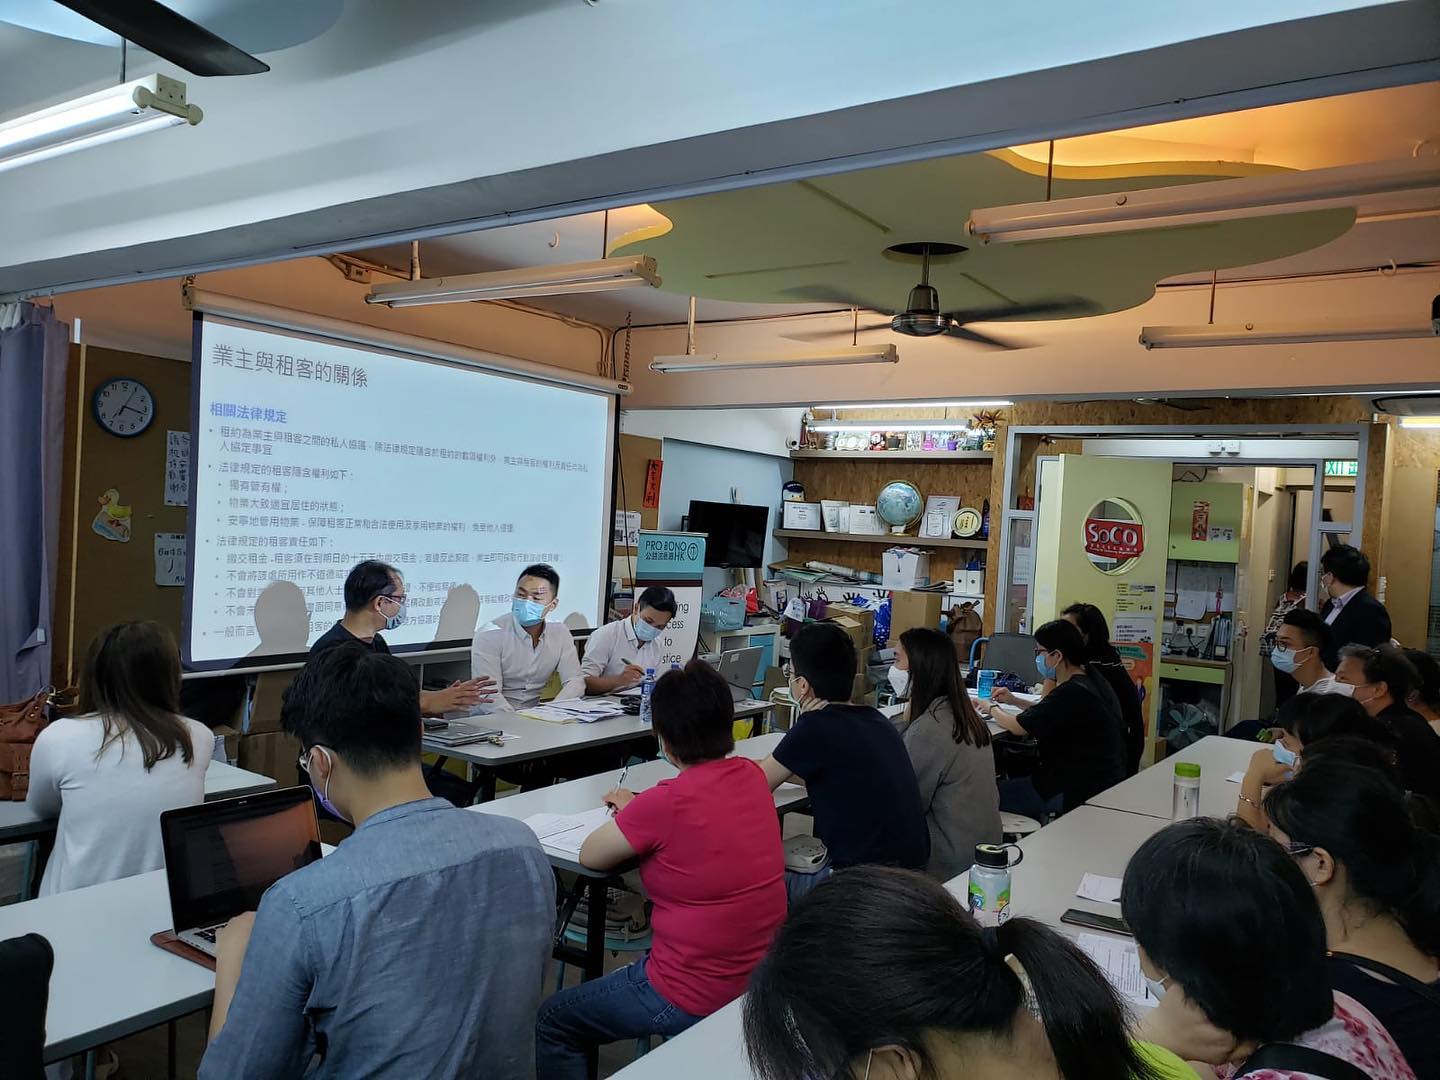 Hong Kong Legal Community Rallies With Pro Bono Work During COVID